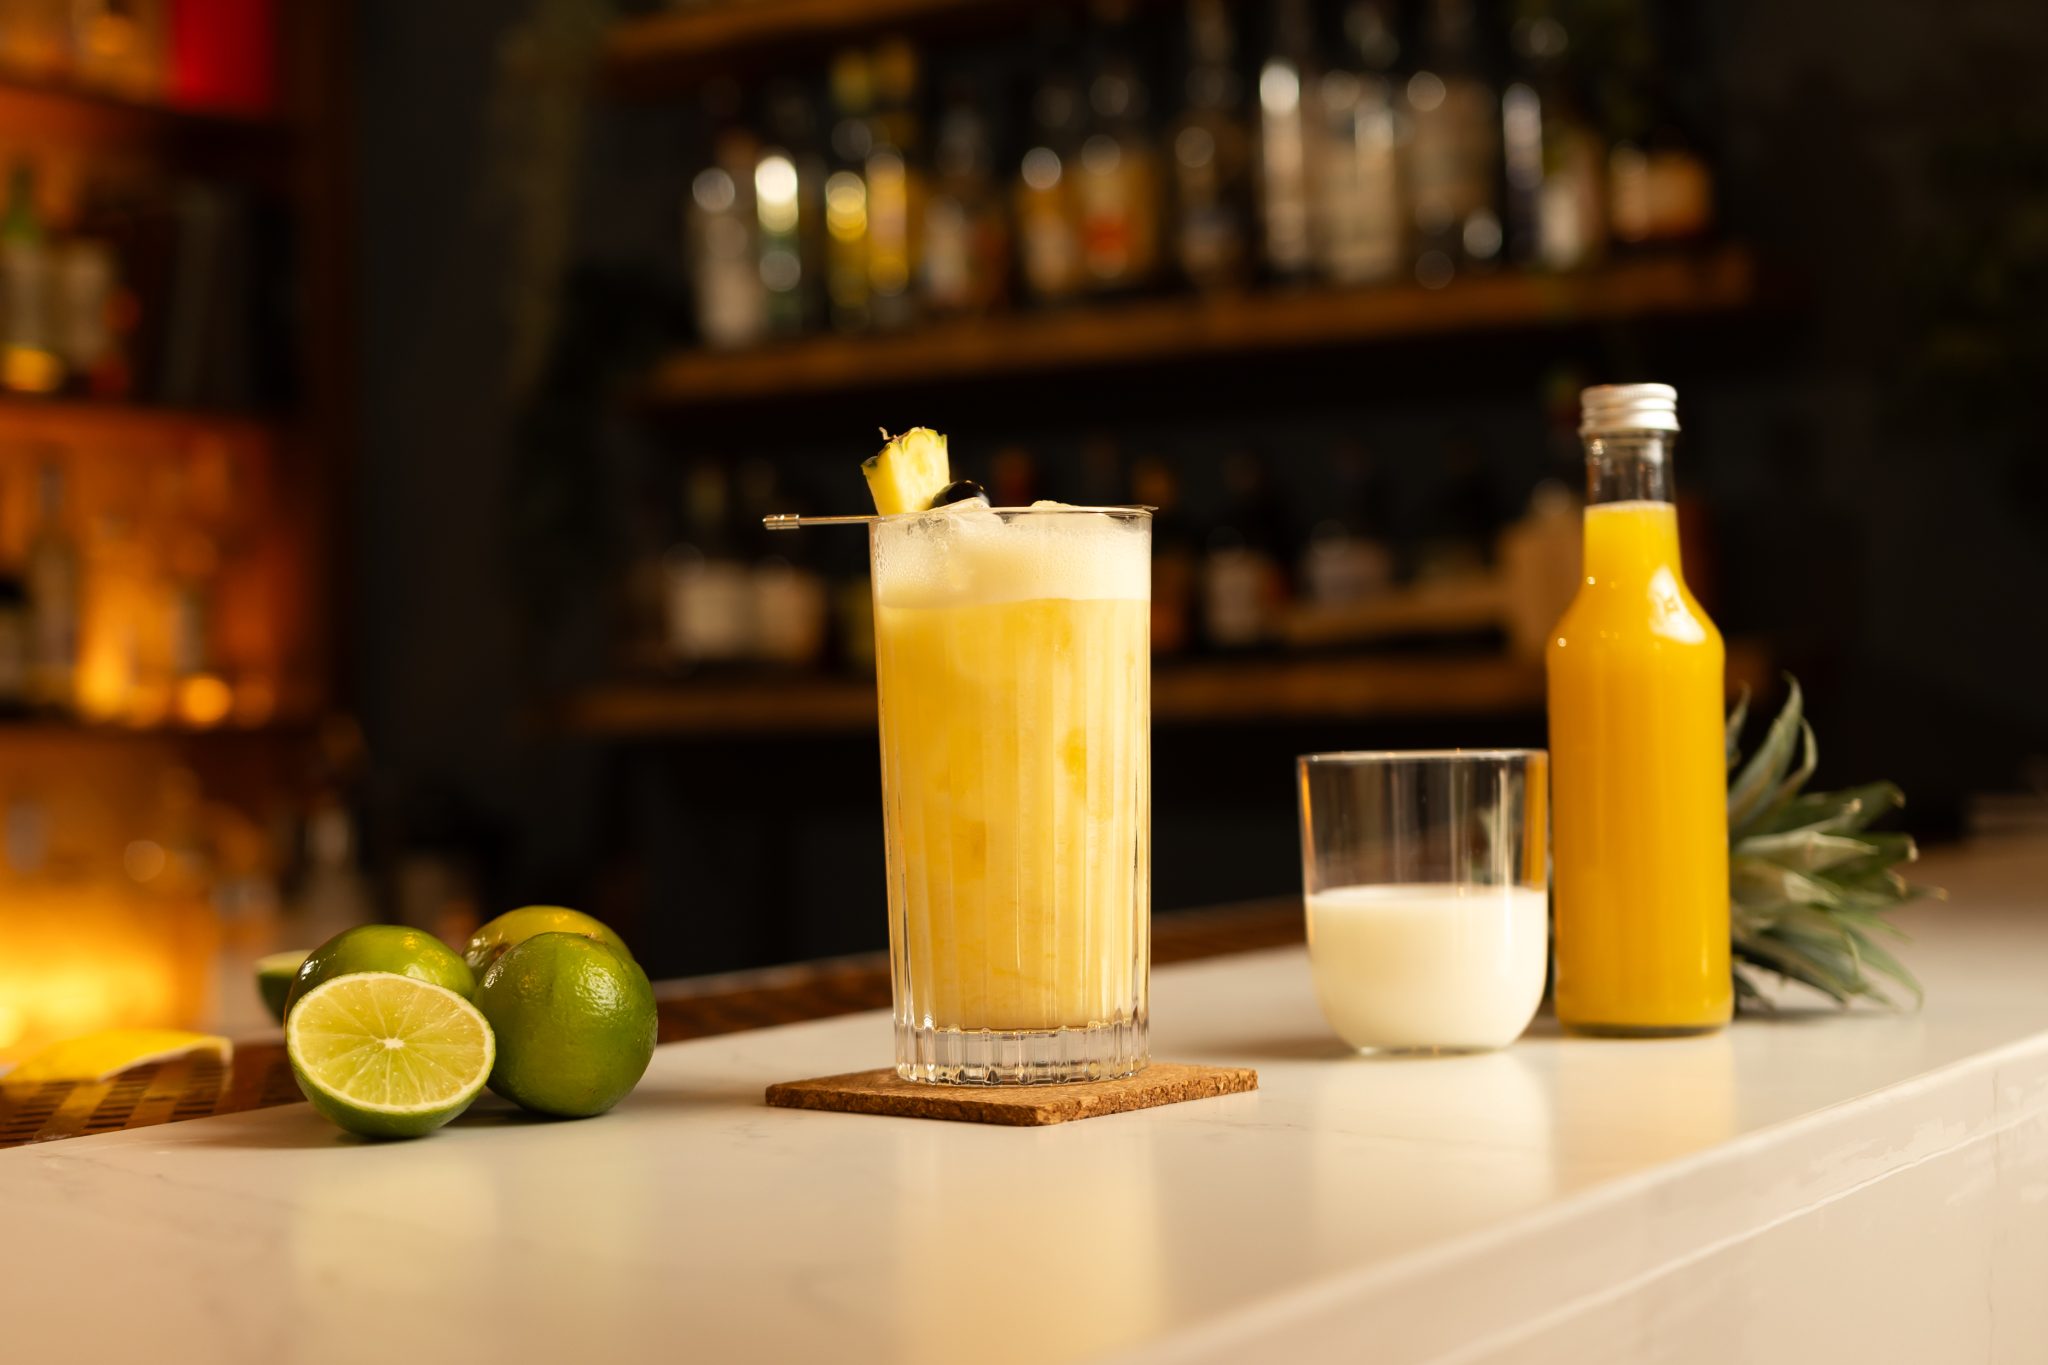 Pineapple juice, coconut cream, and two limes on a white bar table.